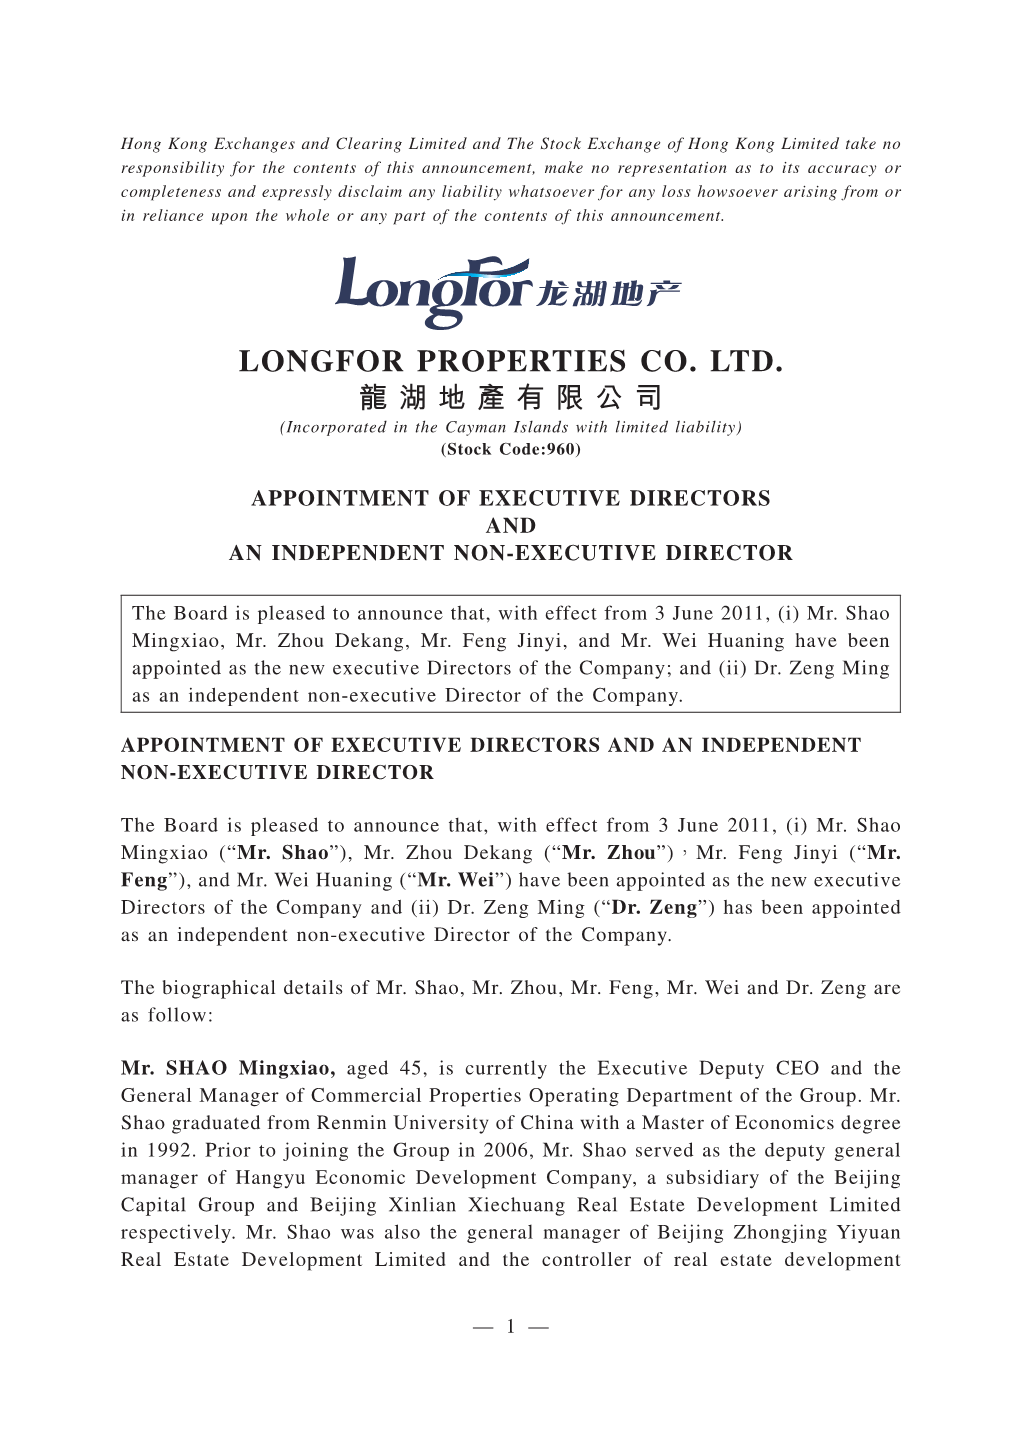 LONGFOR PROPERTIES CO. LTD. 龍湖地產有限公司 (Incorporated in the Cayman Islands with Limited Liability) (Stock Code:960)